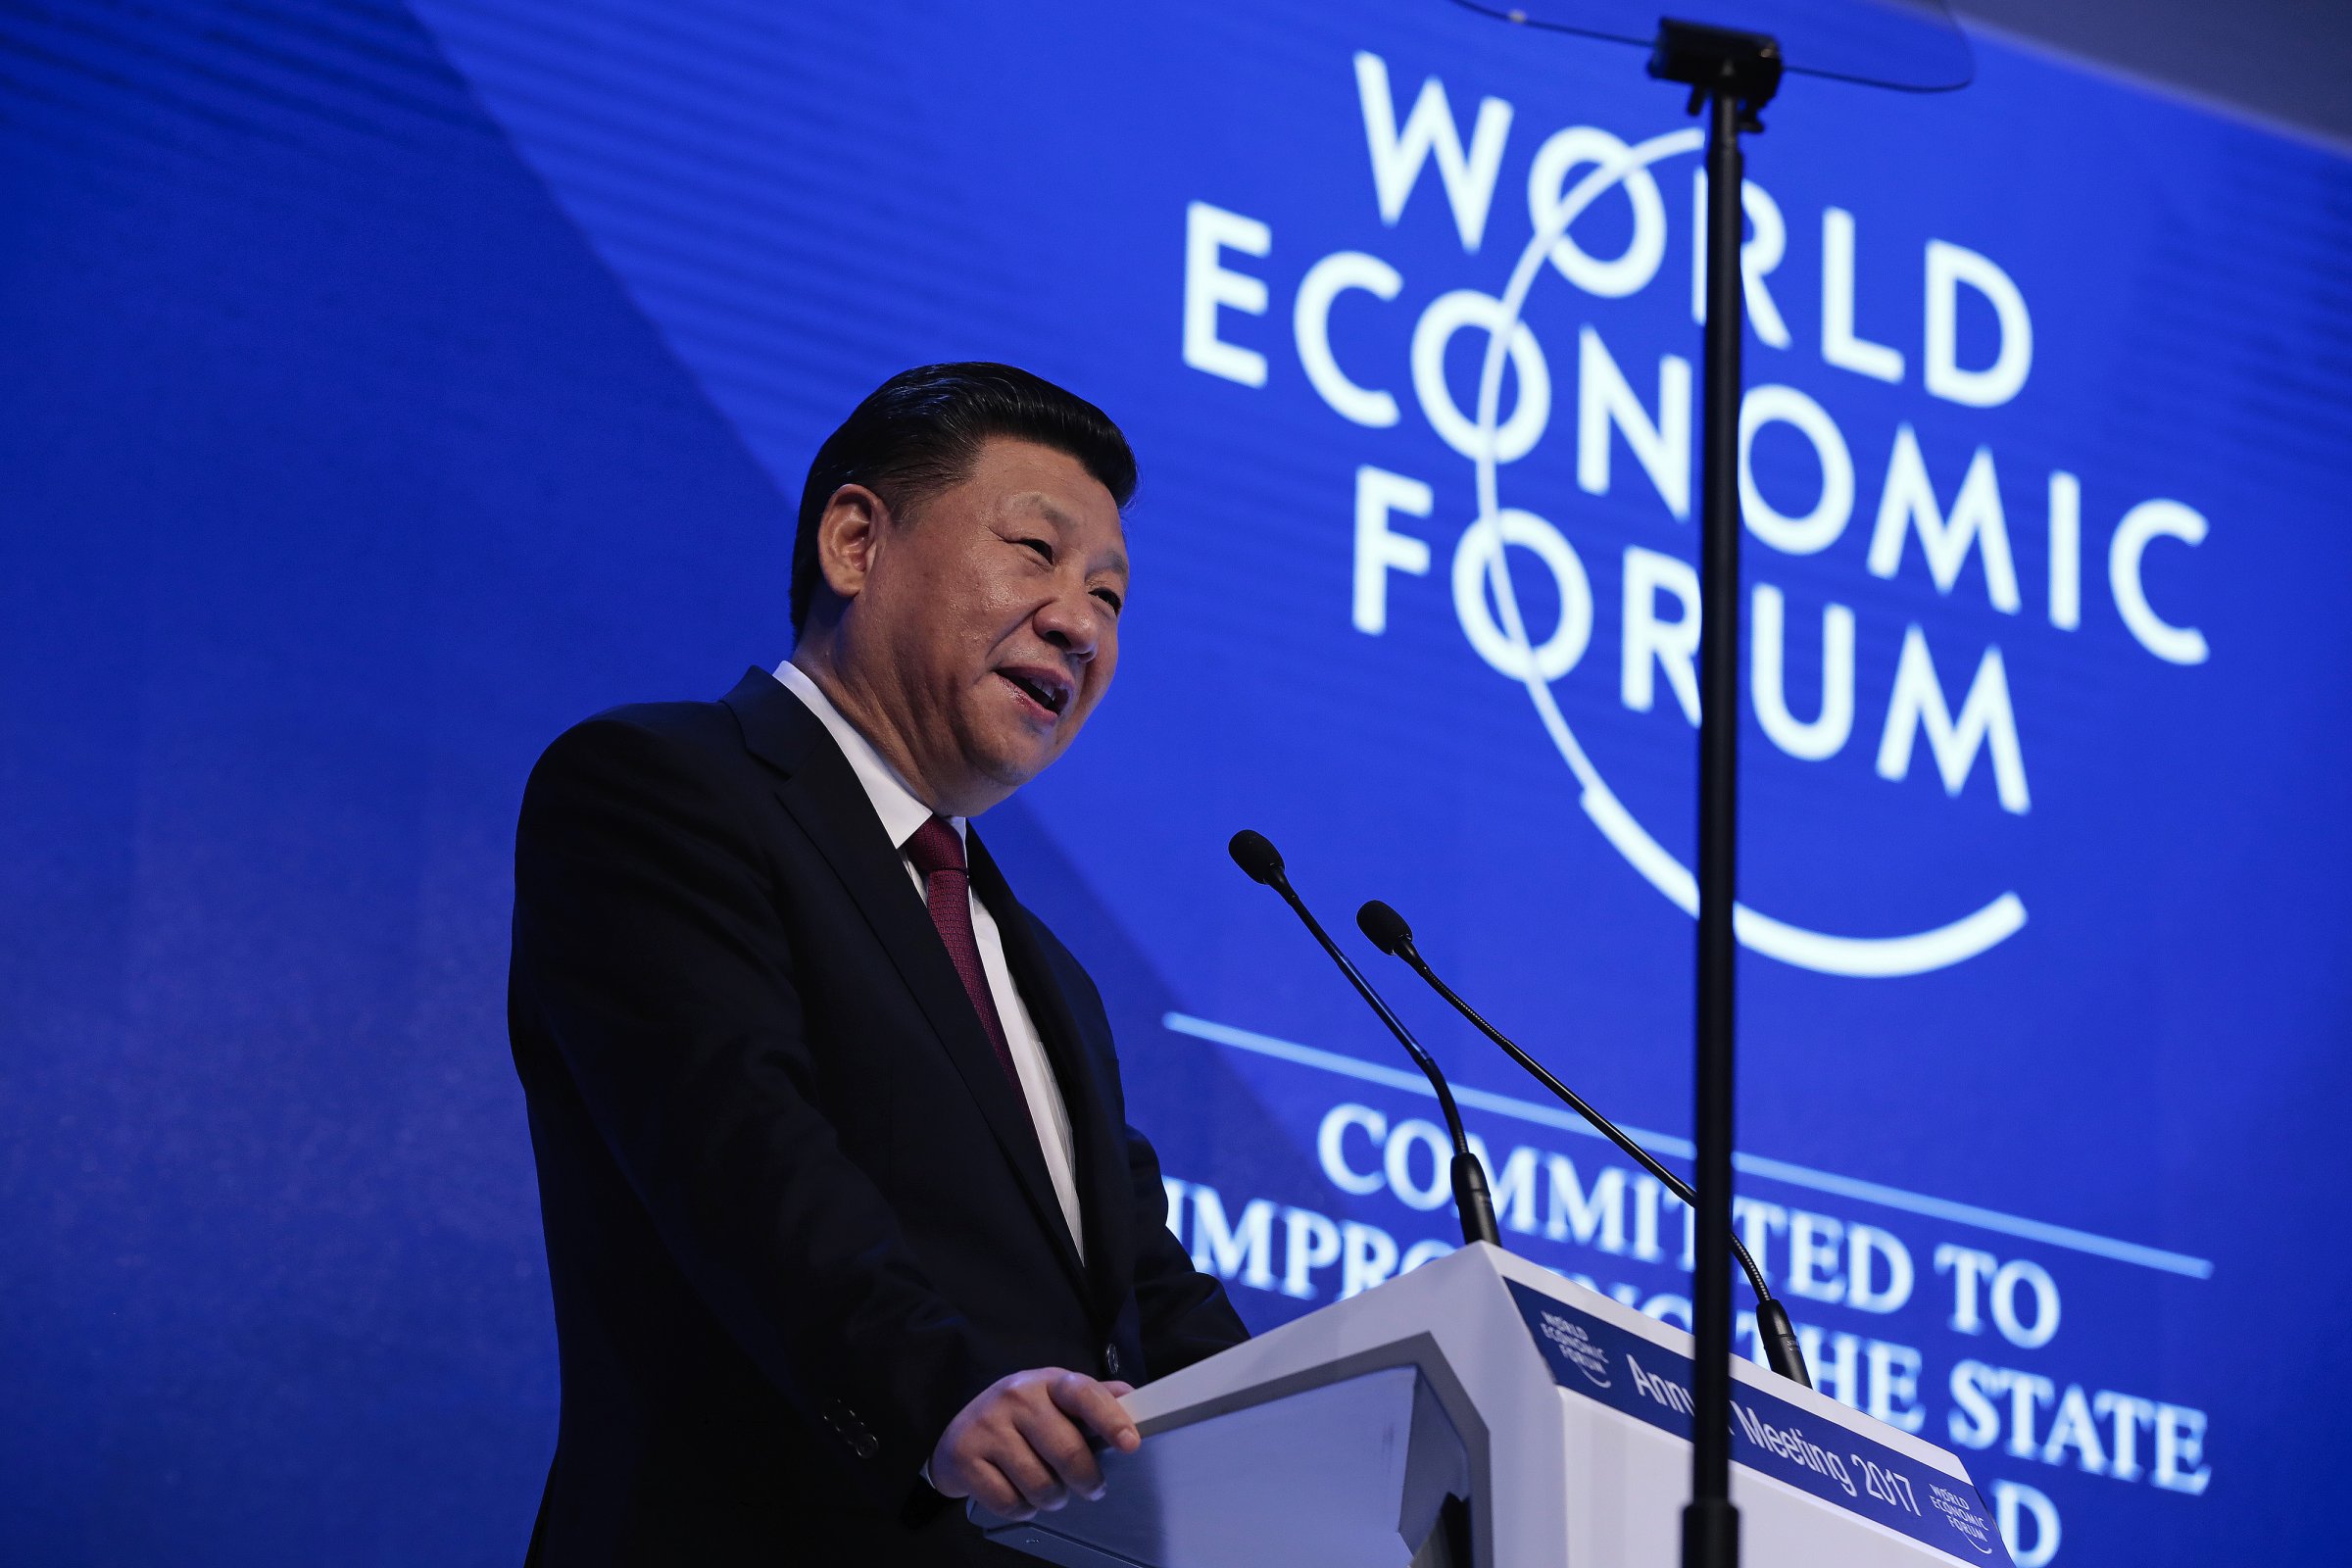 Xi Jinping, China's president, speaks during the opening plenary session of the World Economic Forum (WEF) annual meeting in Davos, Switzerland, on Tuesday, Jan. 17, 2017.